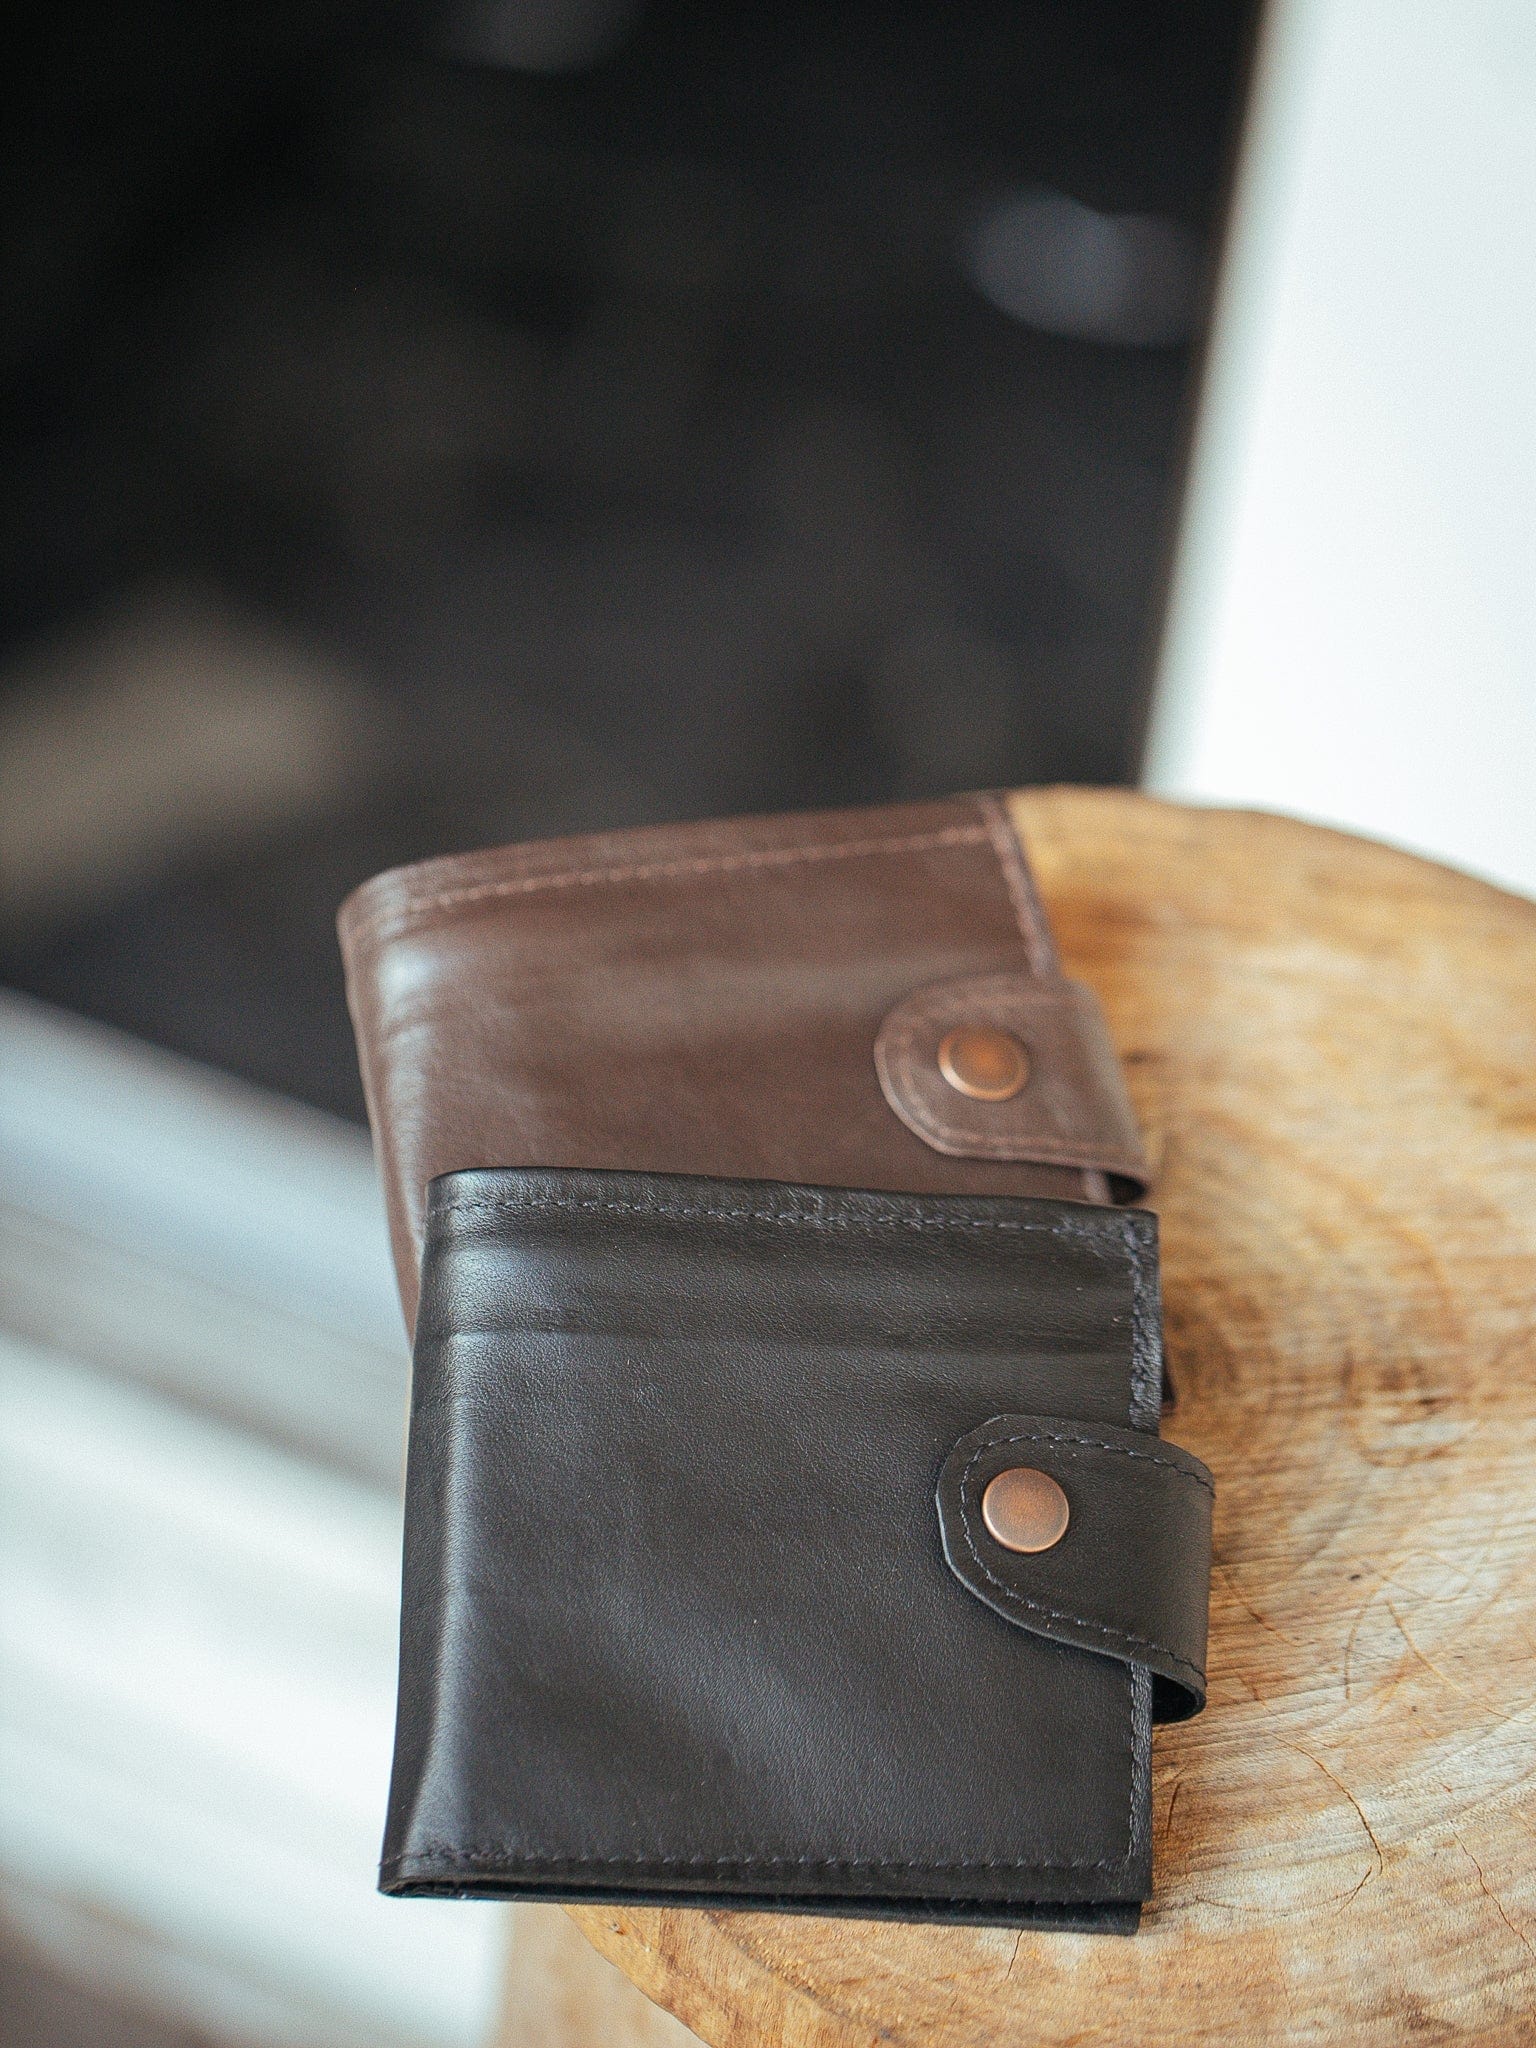 The Real McCaul Wallets Deluxe All-Card Wallet- Kangaroo Australian Made Australian Owned Leather Men's Wallet- Australian Made - Kangaroo & Cowhide